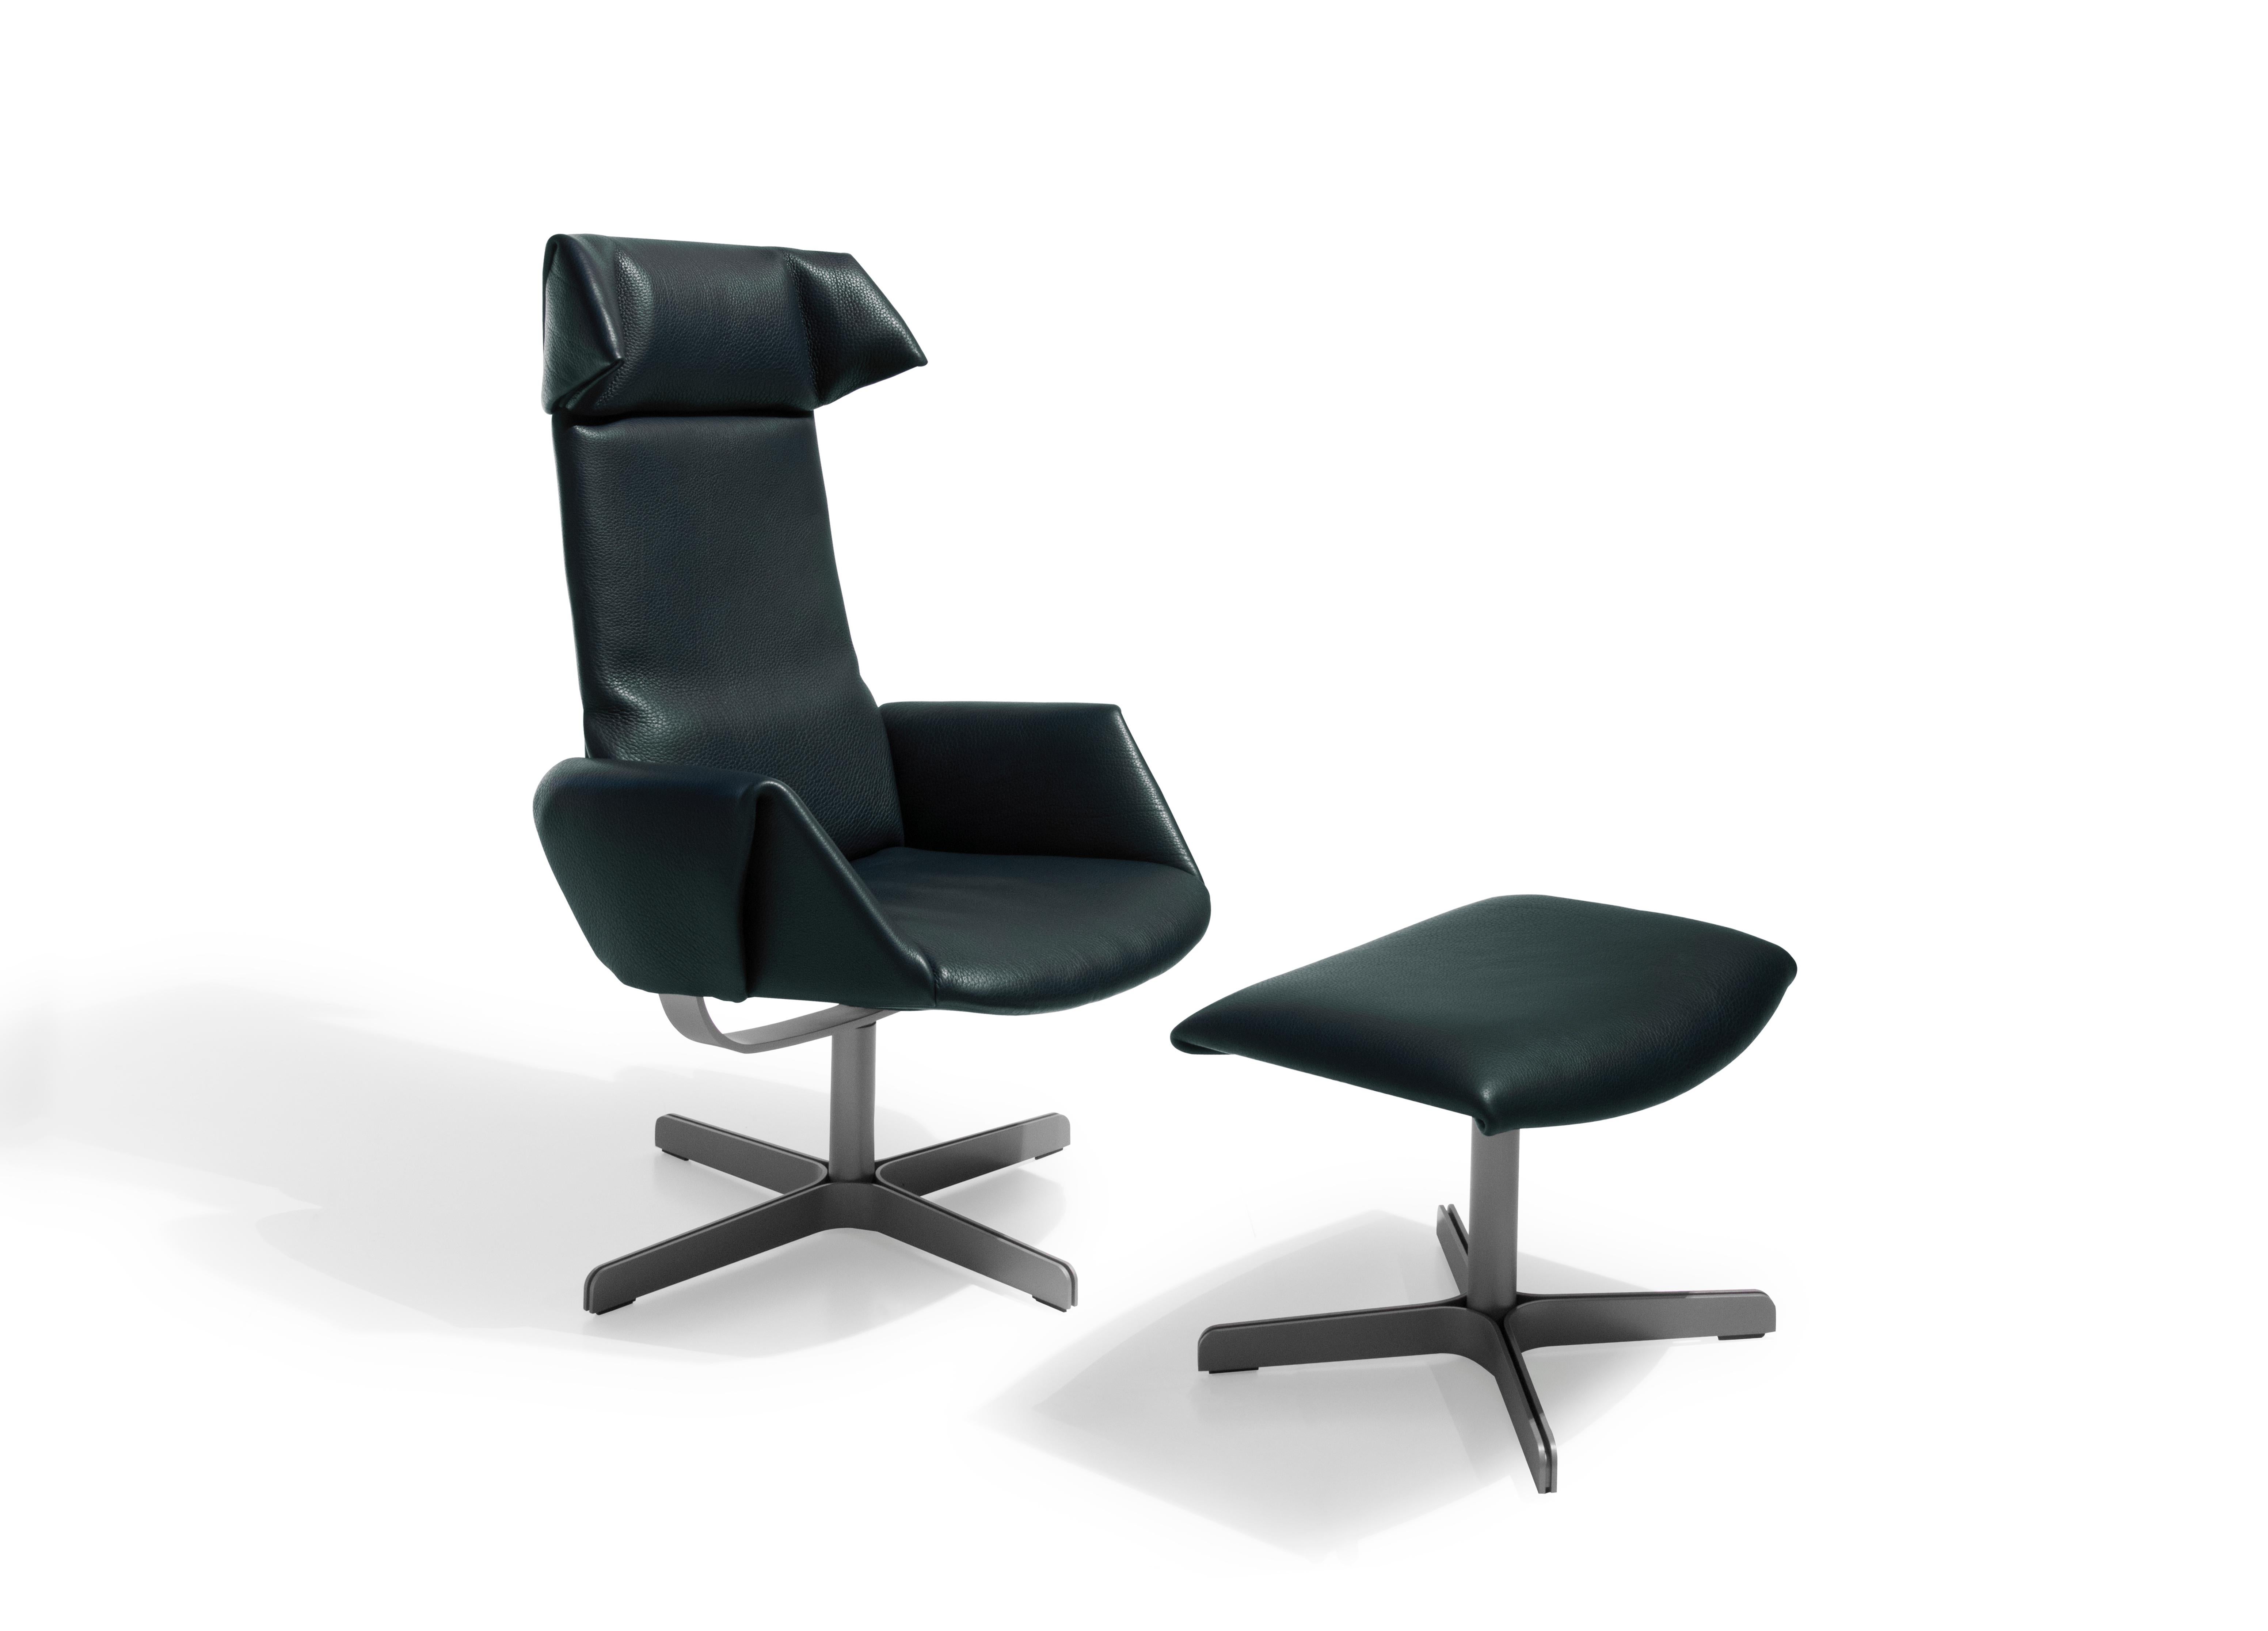 DS-343 armchair by De Sede
Dimensions: D 46 x W 70 x H 120 cm, with extension W 100
Materials: steel, leather

Prices may change according to the chosen materials and size. 

Revolutionary seating concept

DS-343 is an armchair that moves